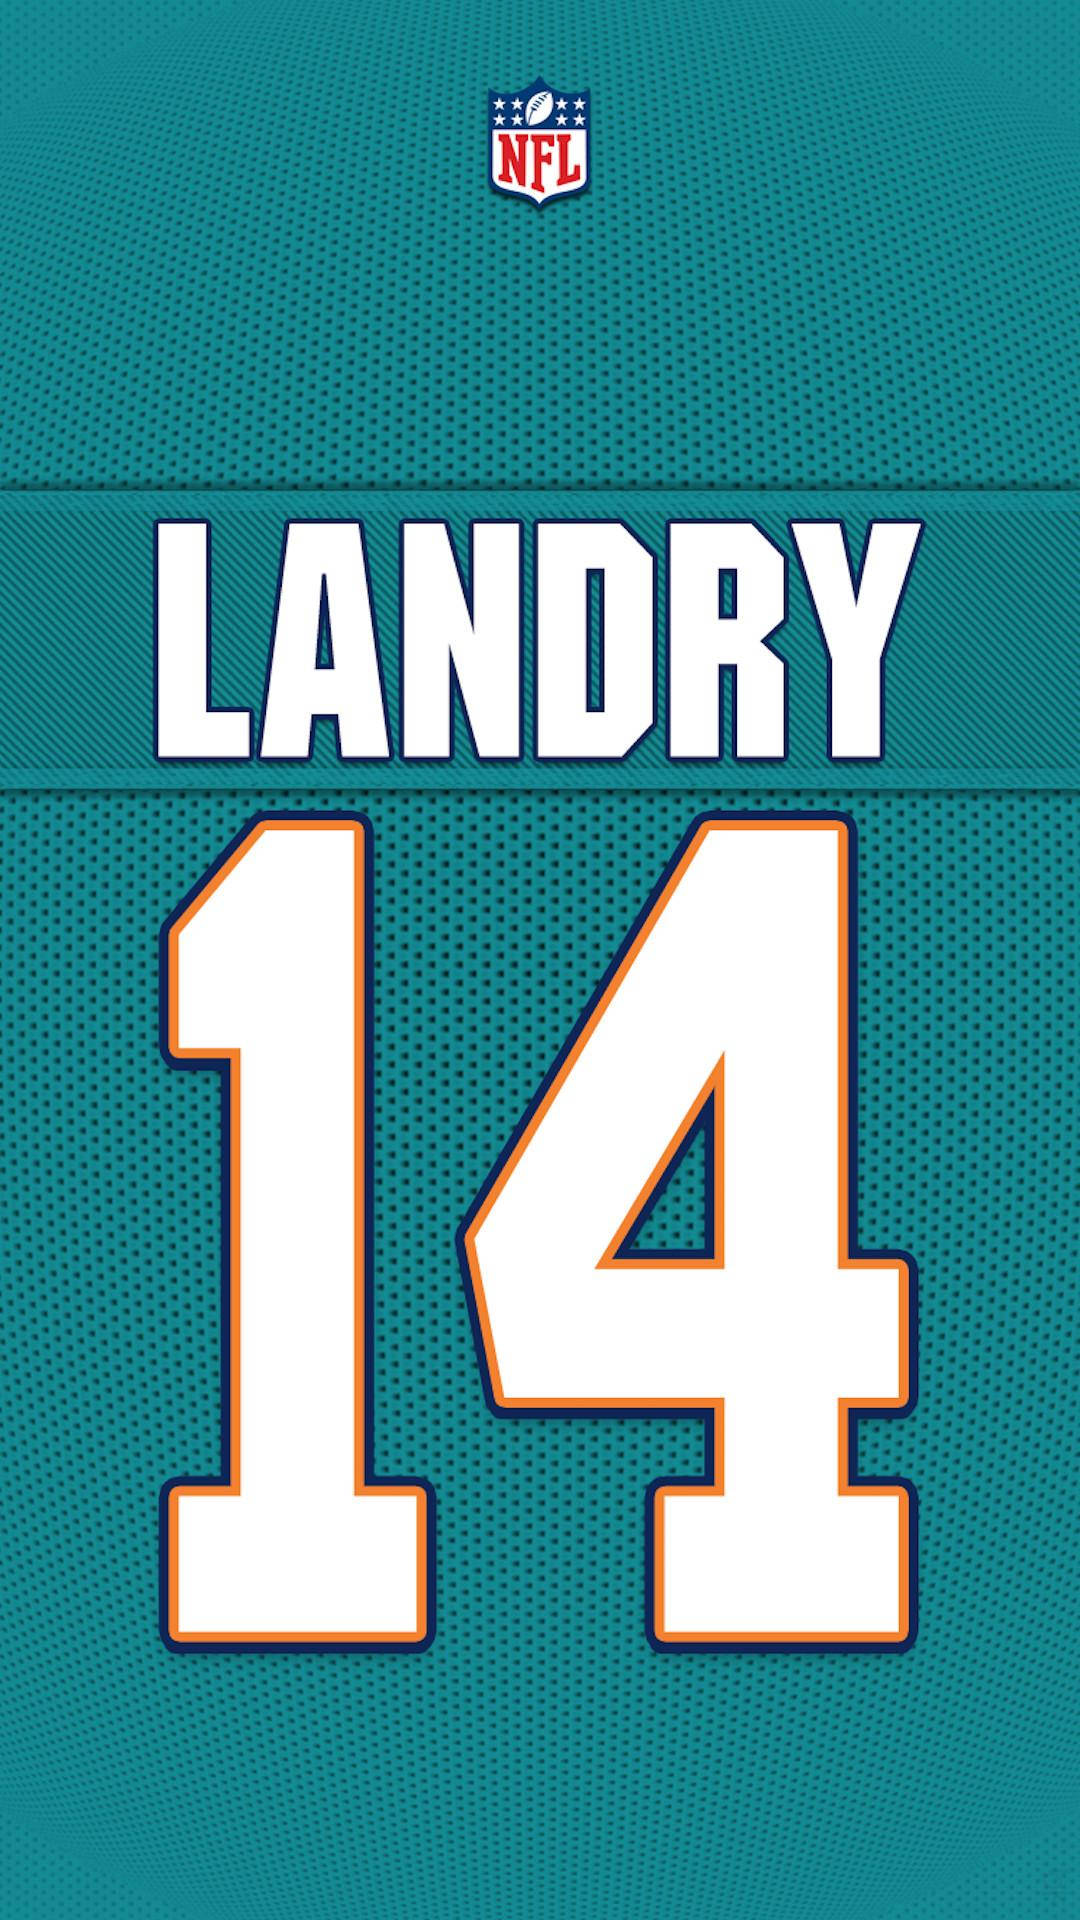 Get the Miami Dolphins-inspired look for your Iphone Wallpaper